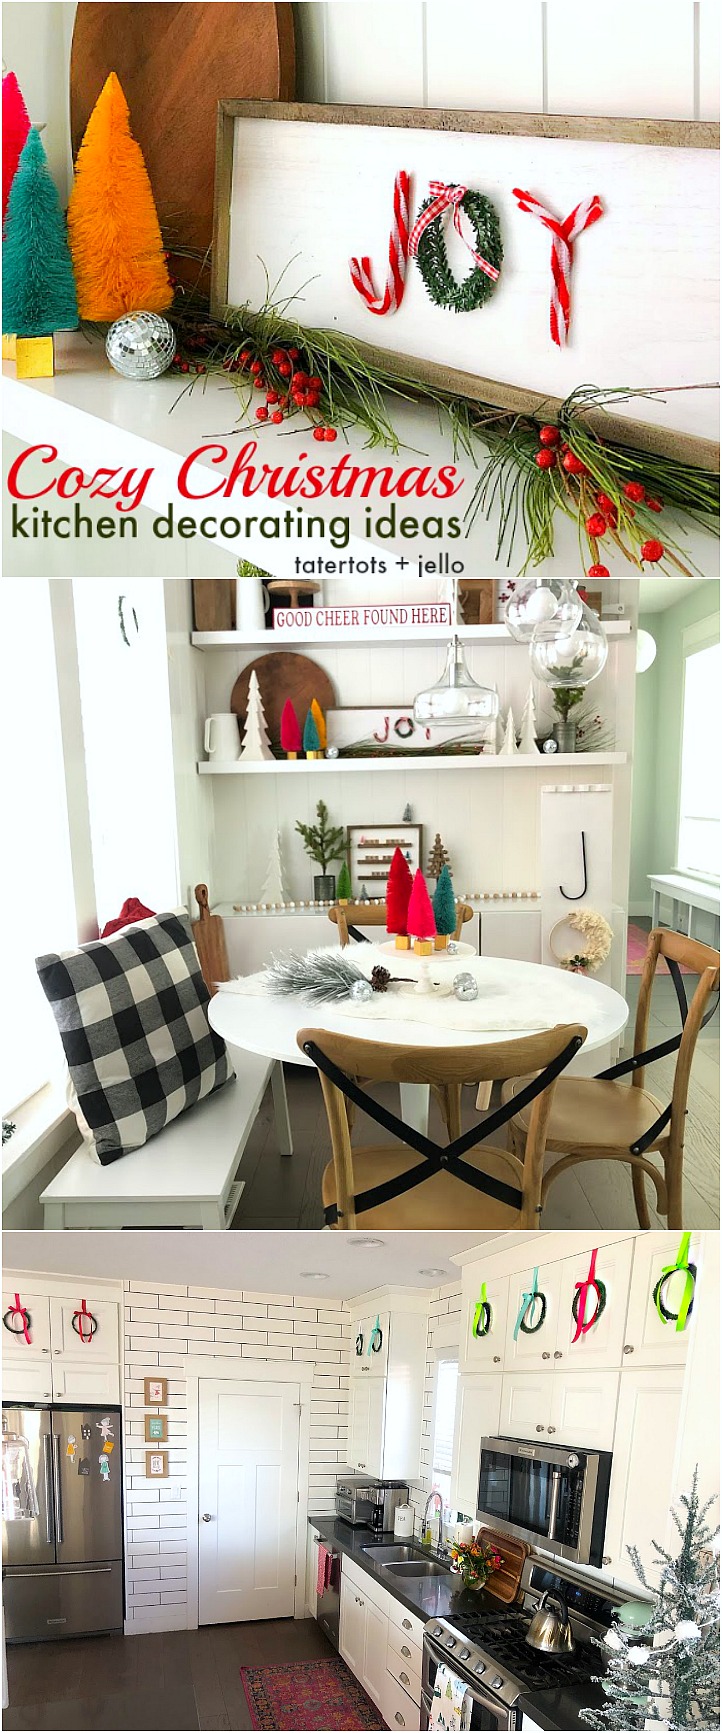 Cozy Christmas Kitchen Nook Decorating Ideas! Decorate shelves in your kitchen for the holidays with DIY projects, greenery and trees for a welcoming place to gather with your family.